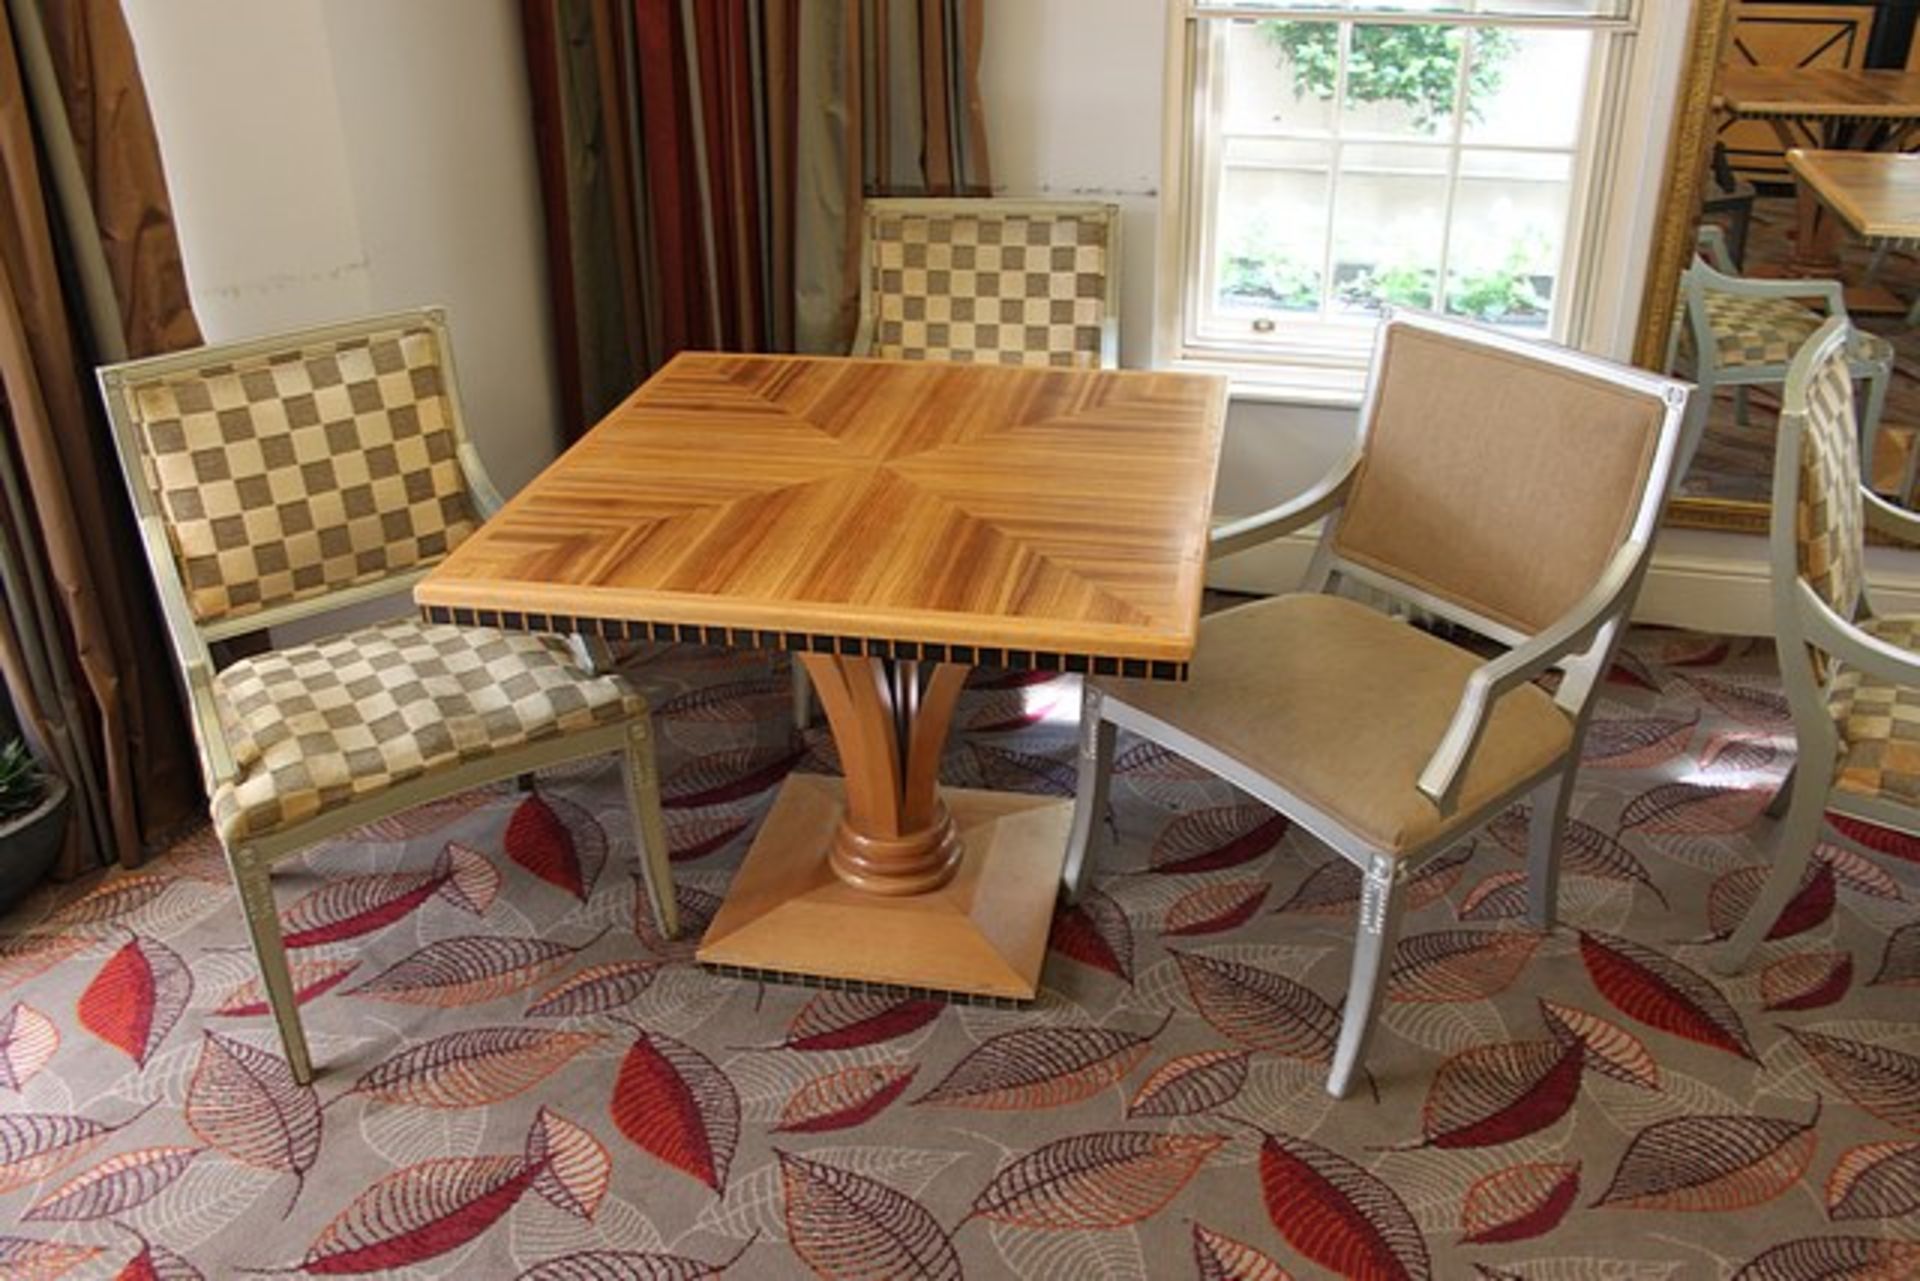 Dining table art deco inspired 950mm x 950mm x 760mm solid wooden top mounted on quad splayed